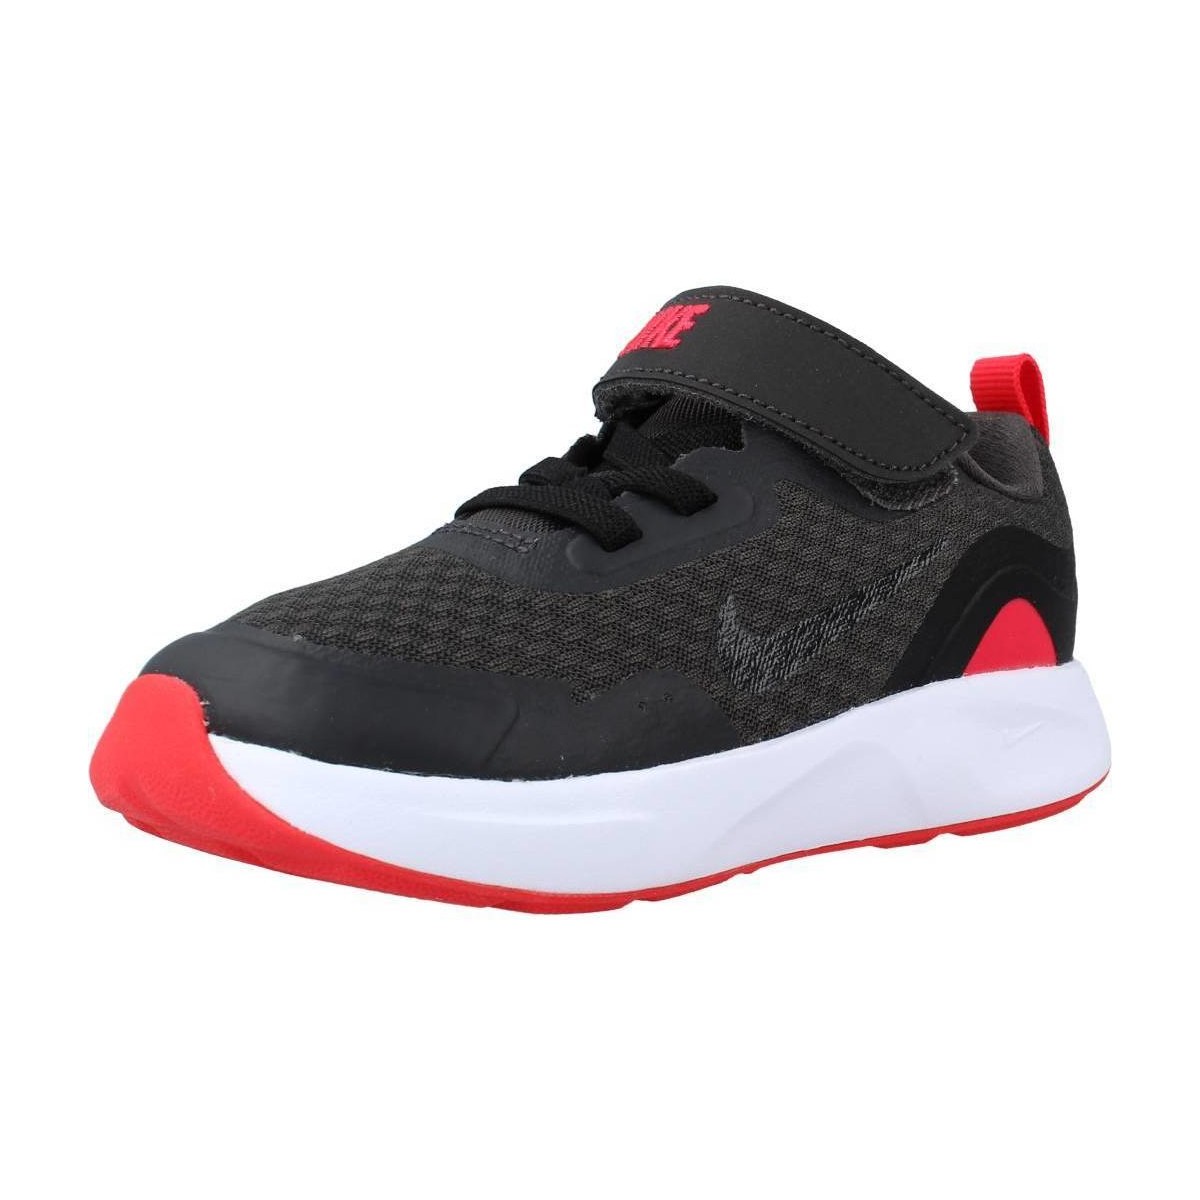 Xαμηλά Sneakers Nike WEARALLDAY BABY/TODDLER SHOE